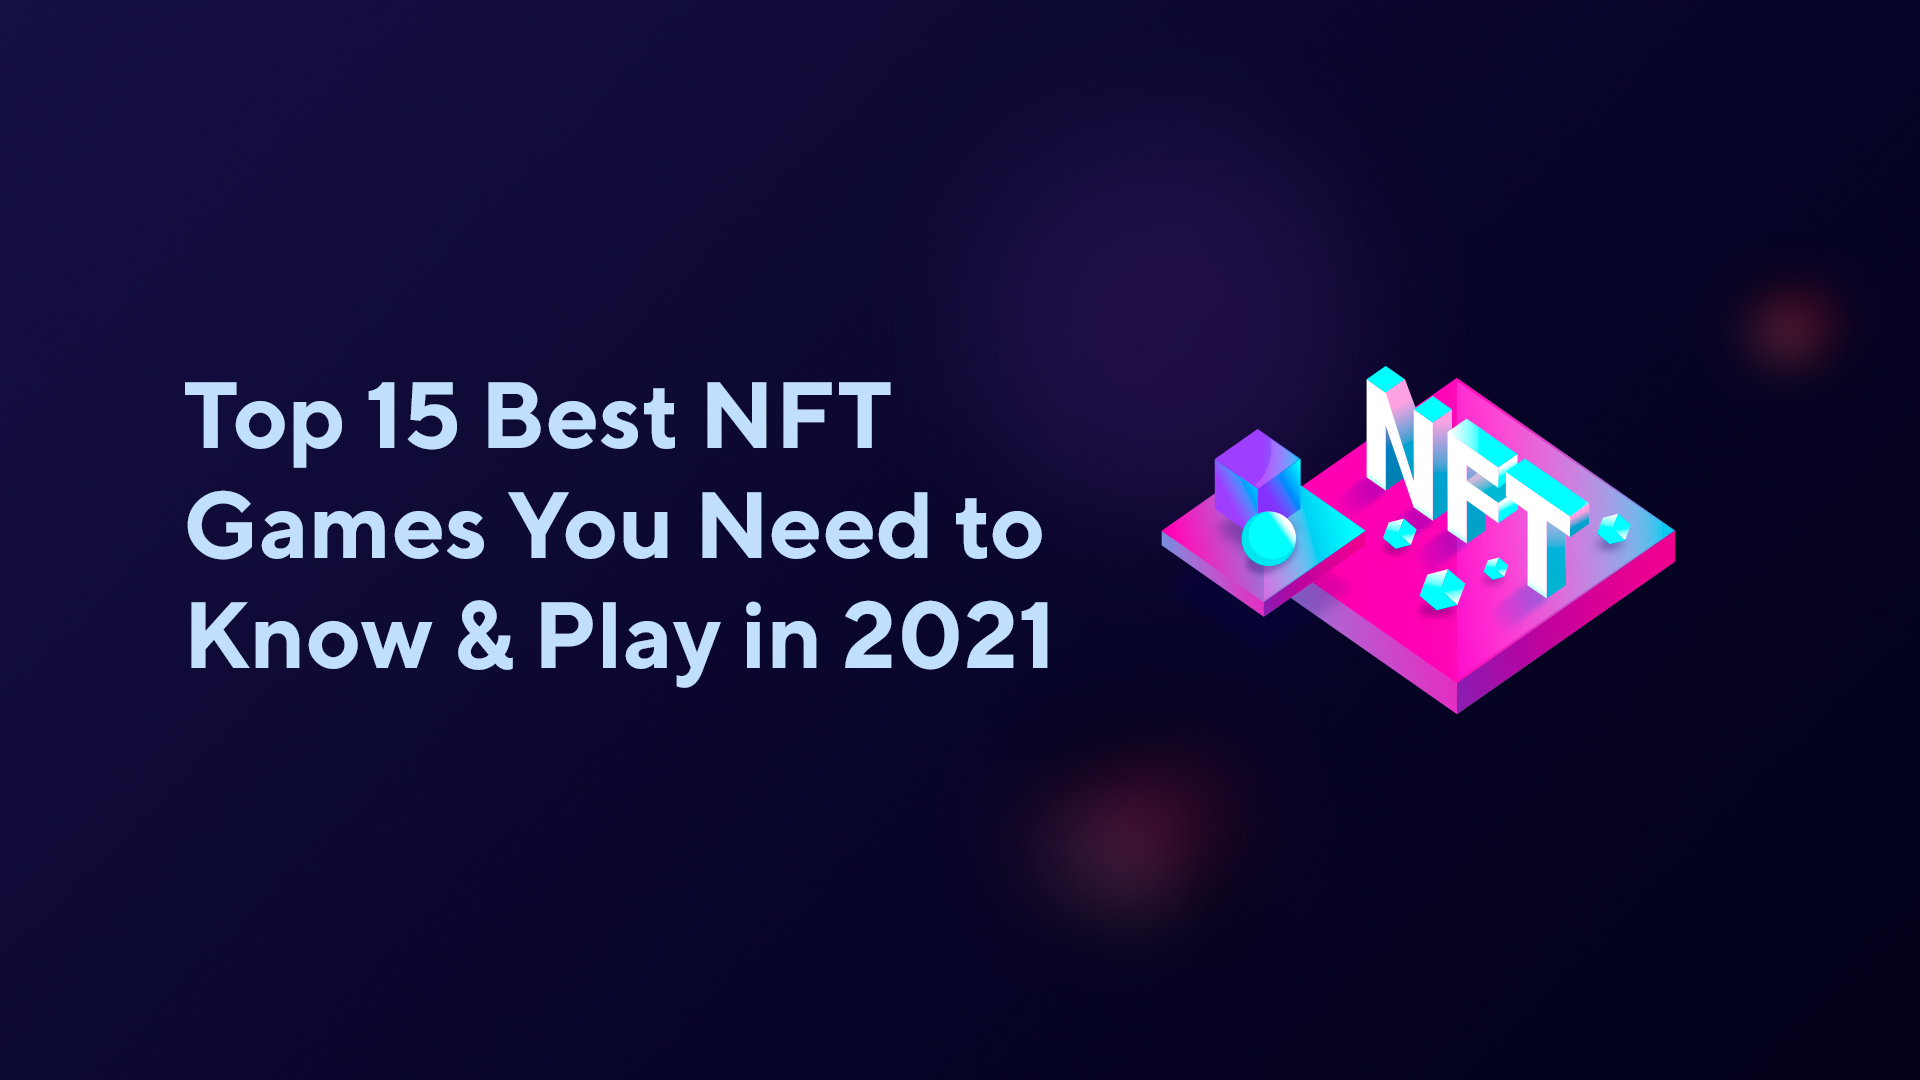 Top 15 Best NFT Games You Need to Know & Play in 2022